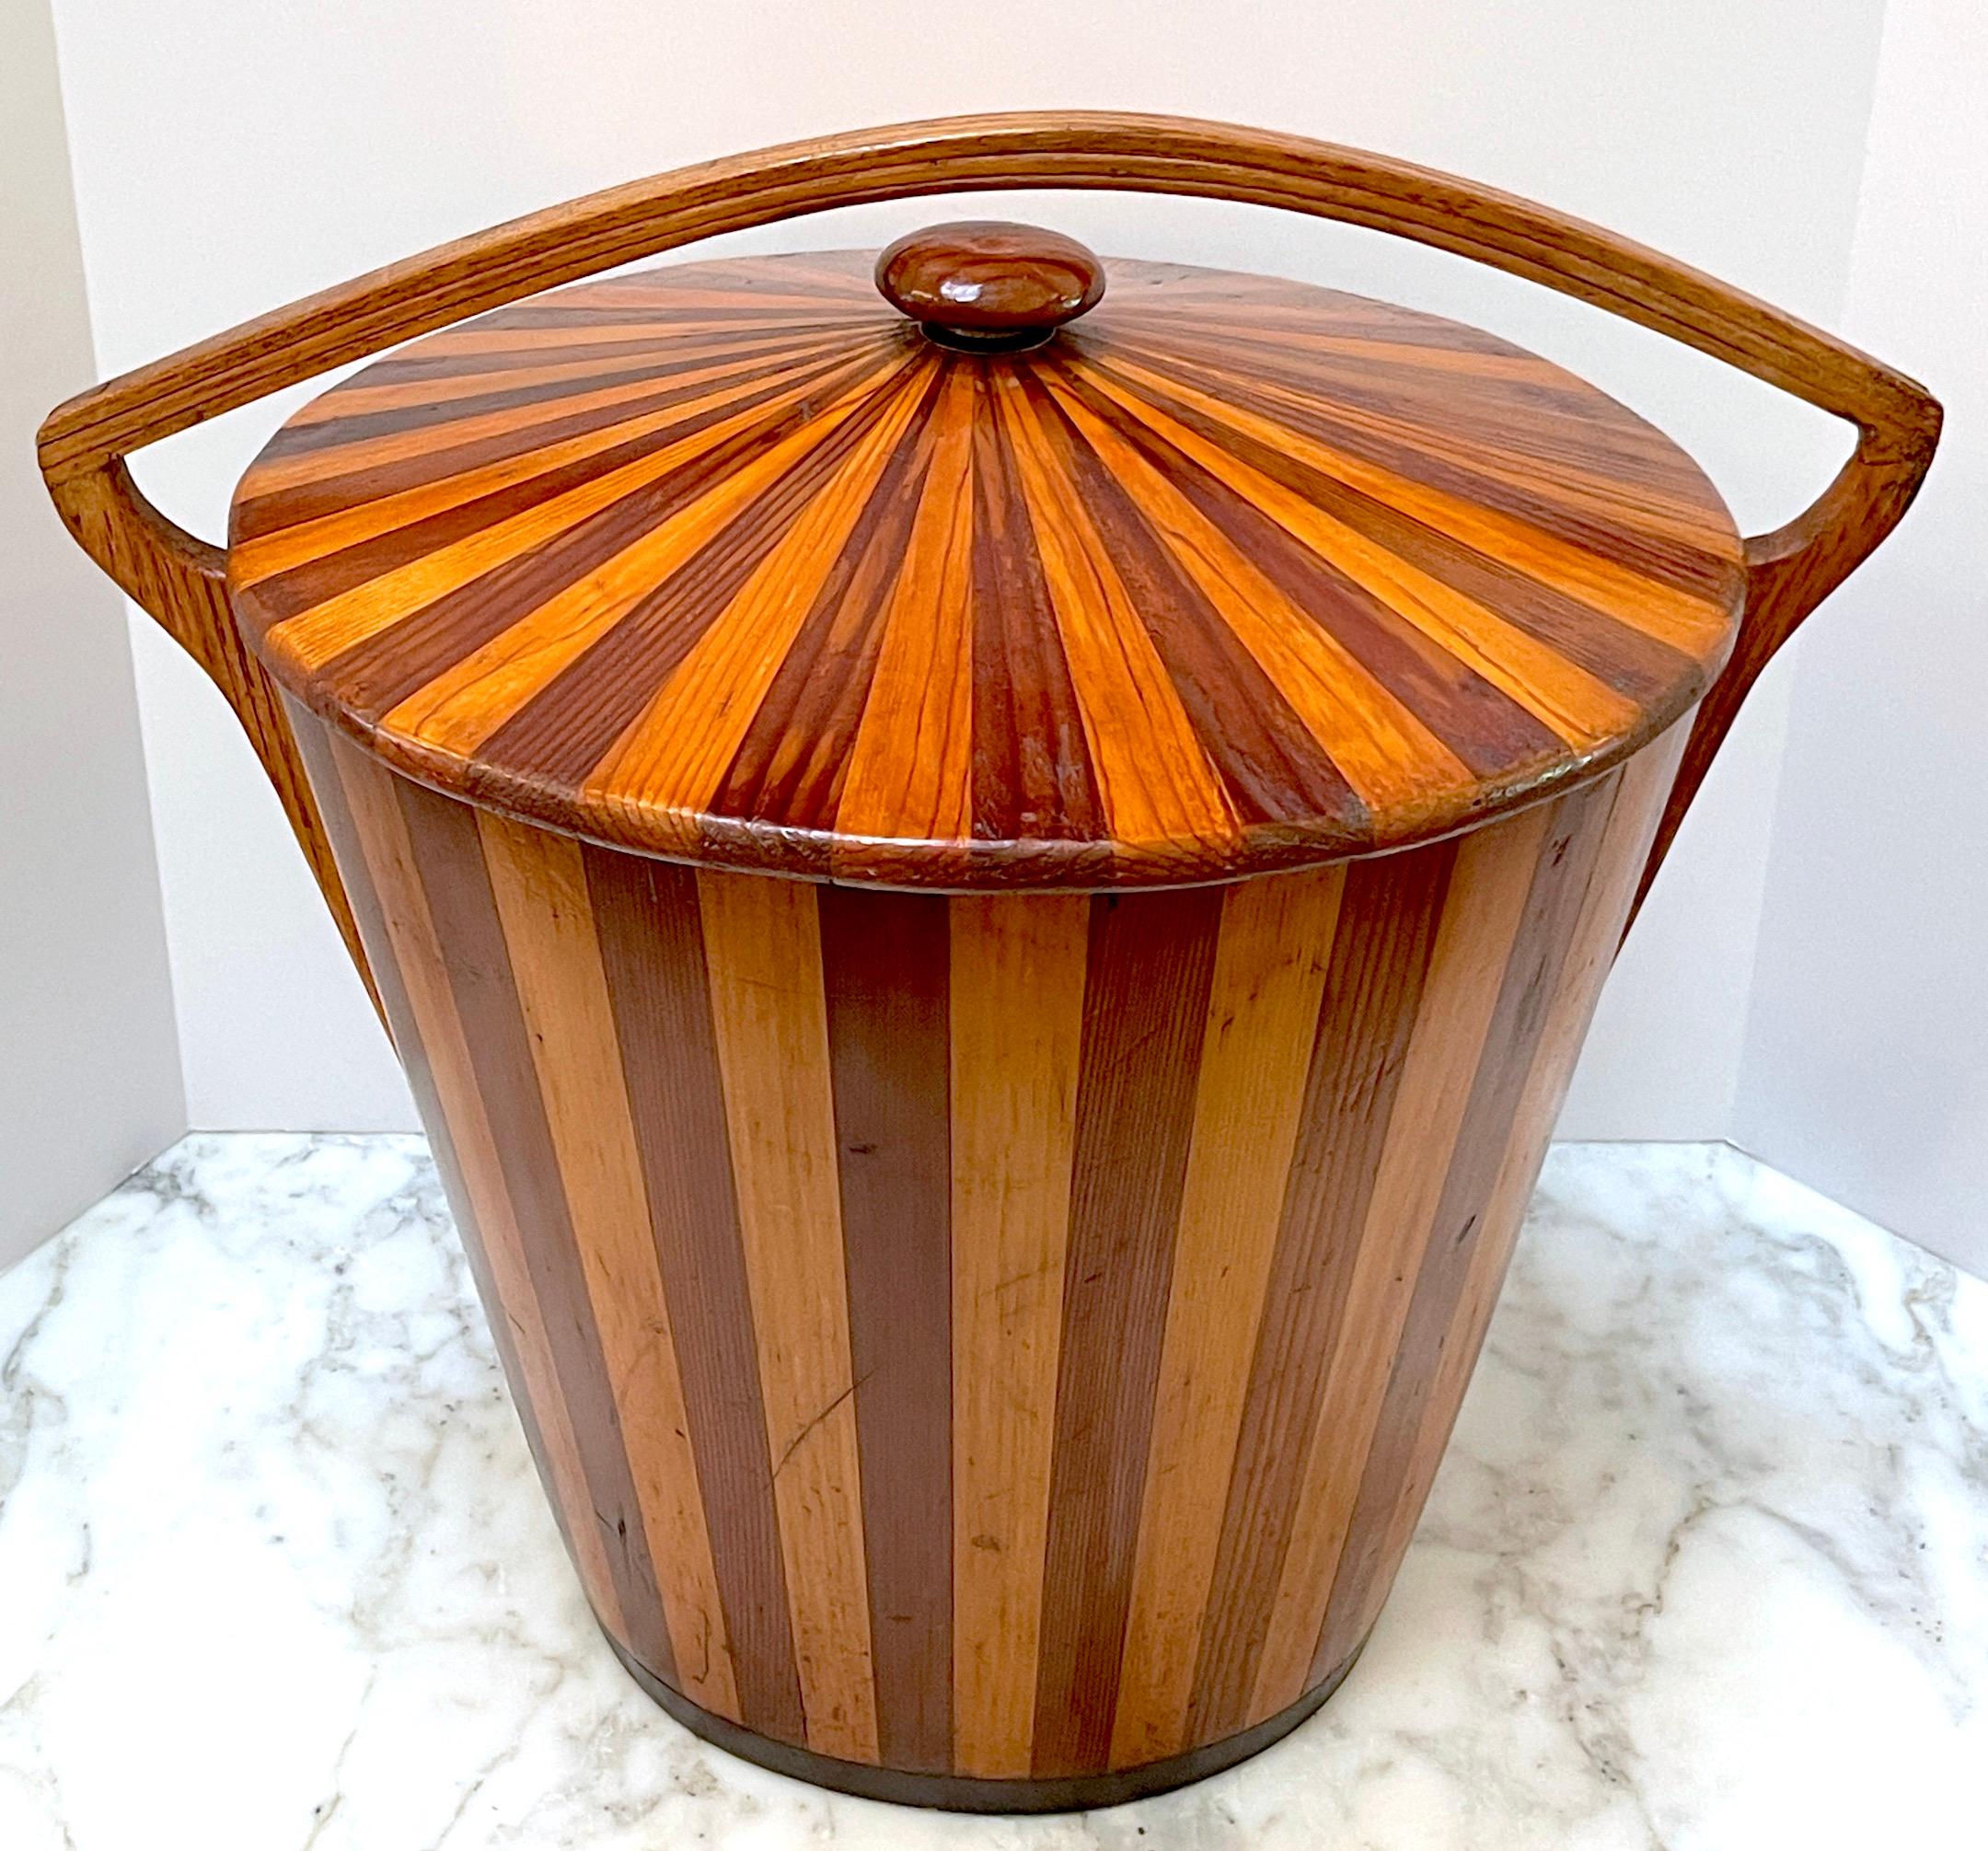 Joinery American Modernist Geometric  Inlaid Two-Tone Wood Lidded Bucket /Vessel, 1950s  For Sale